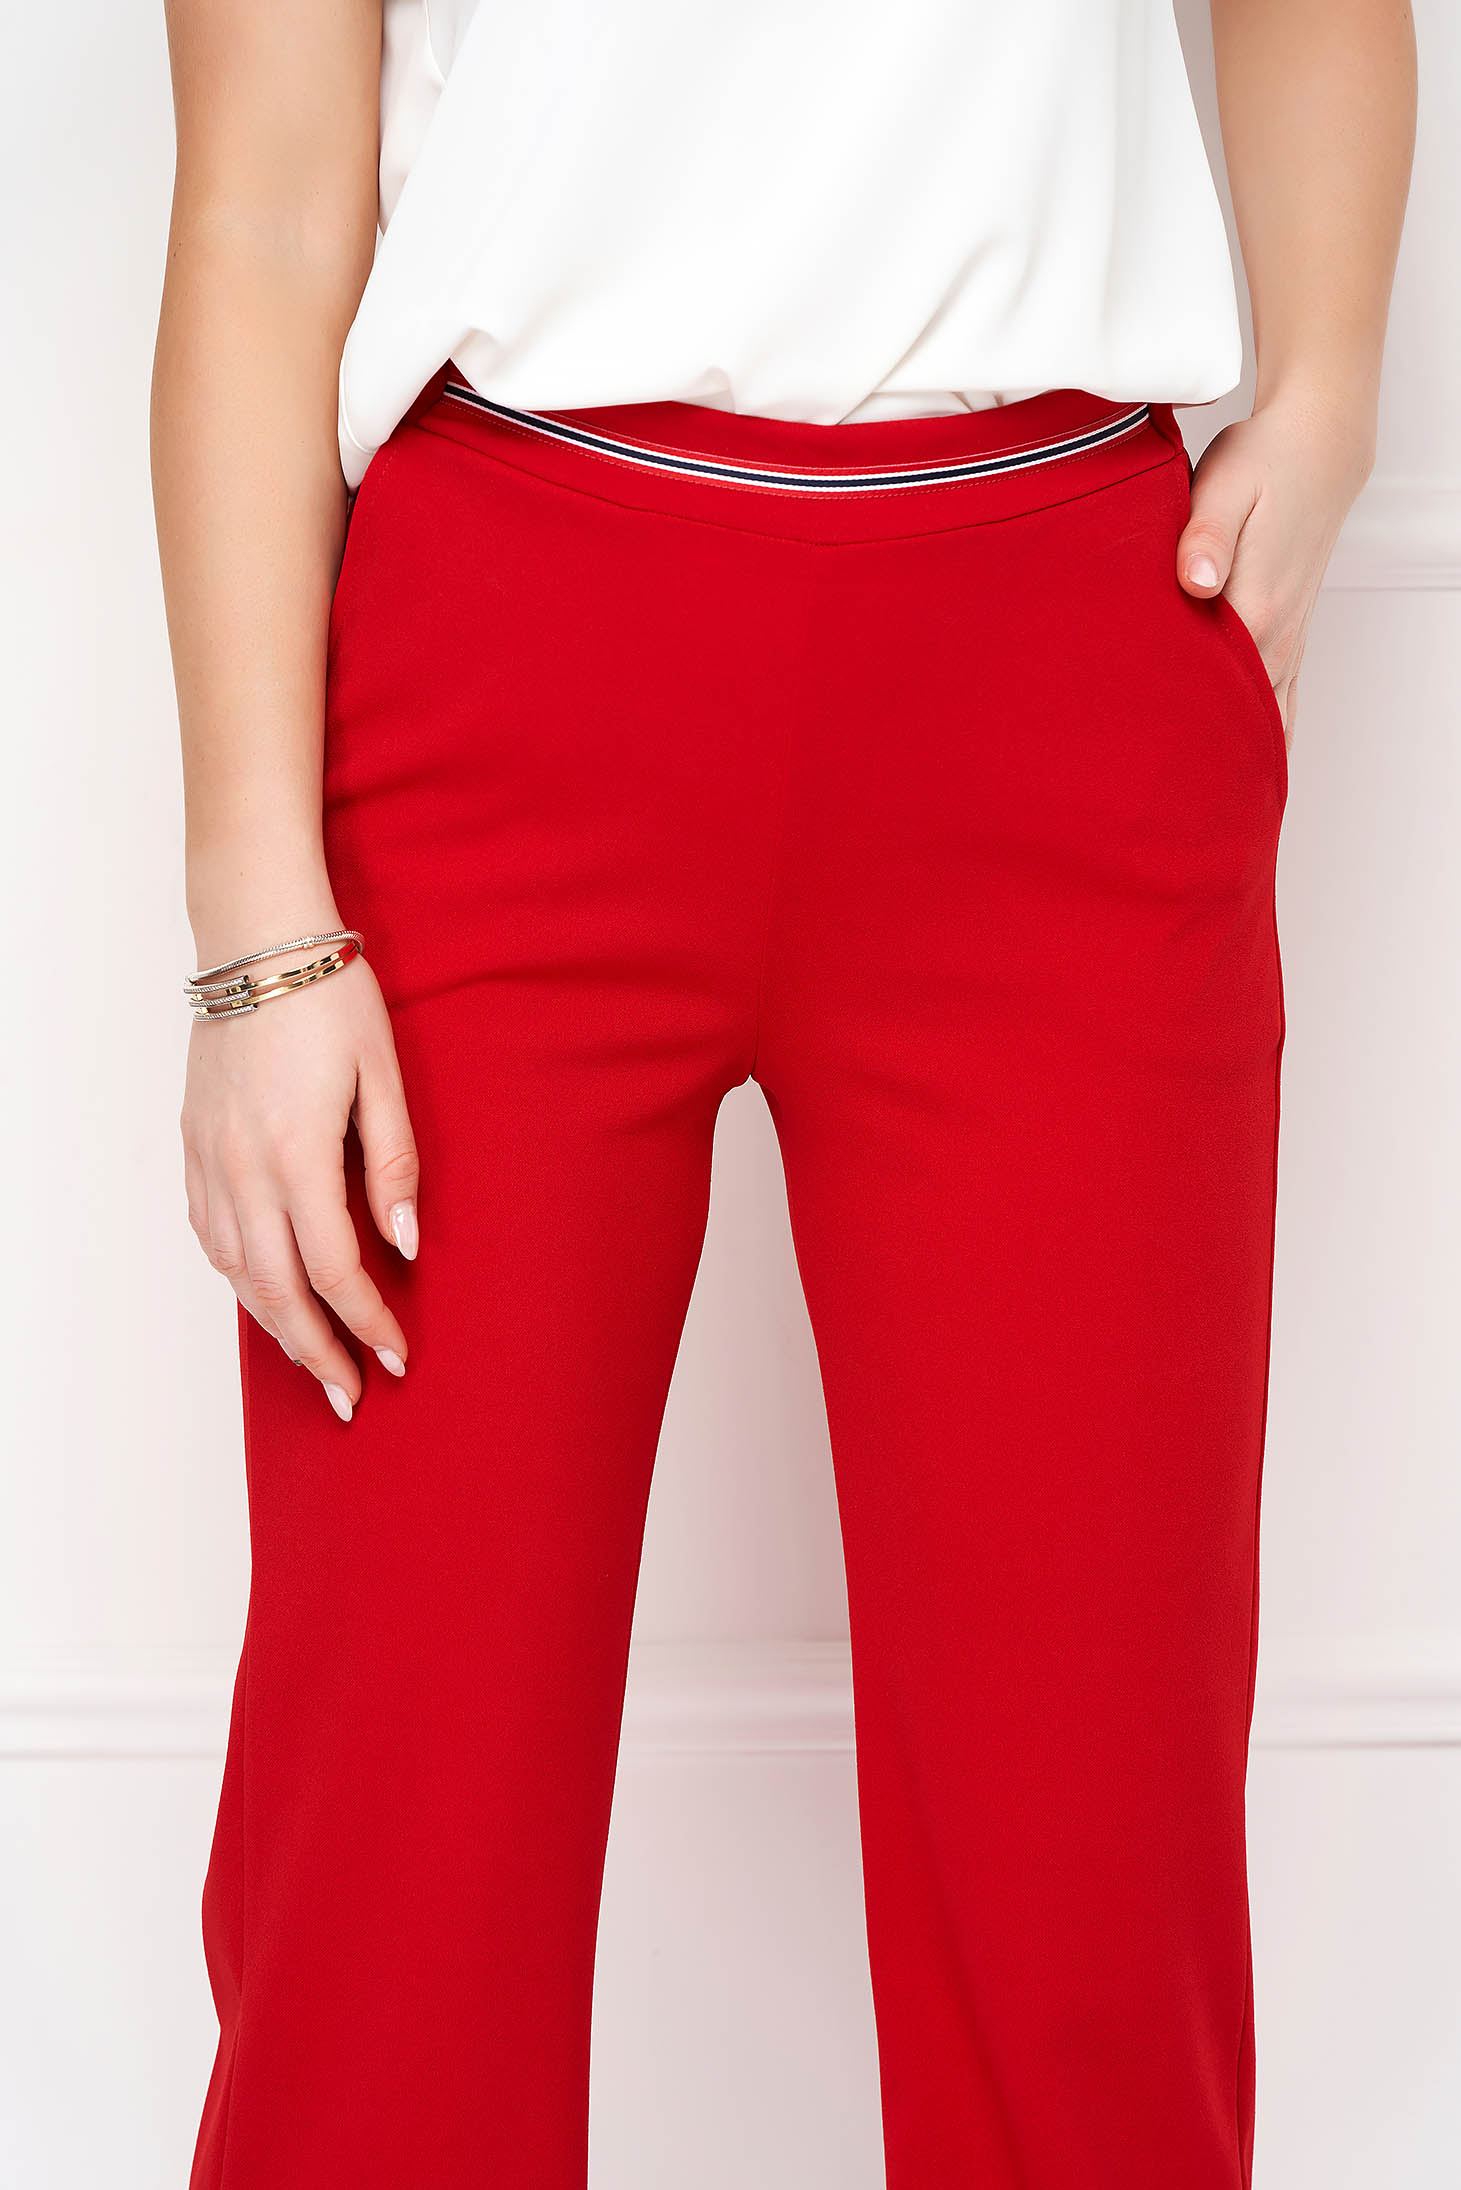 Red Flared Long Crepe Pants with Pockets - StarShinerS 5 - StarShinerS.com